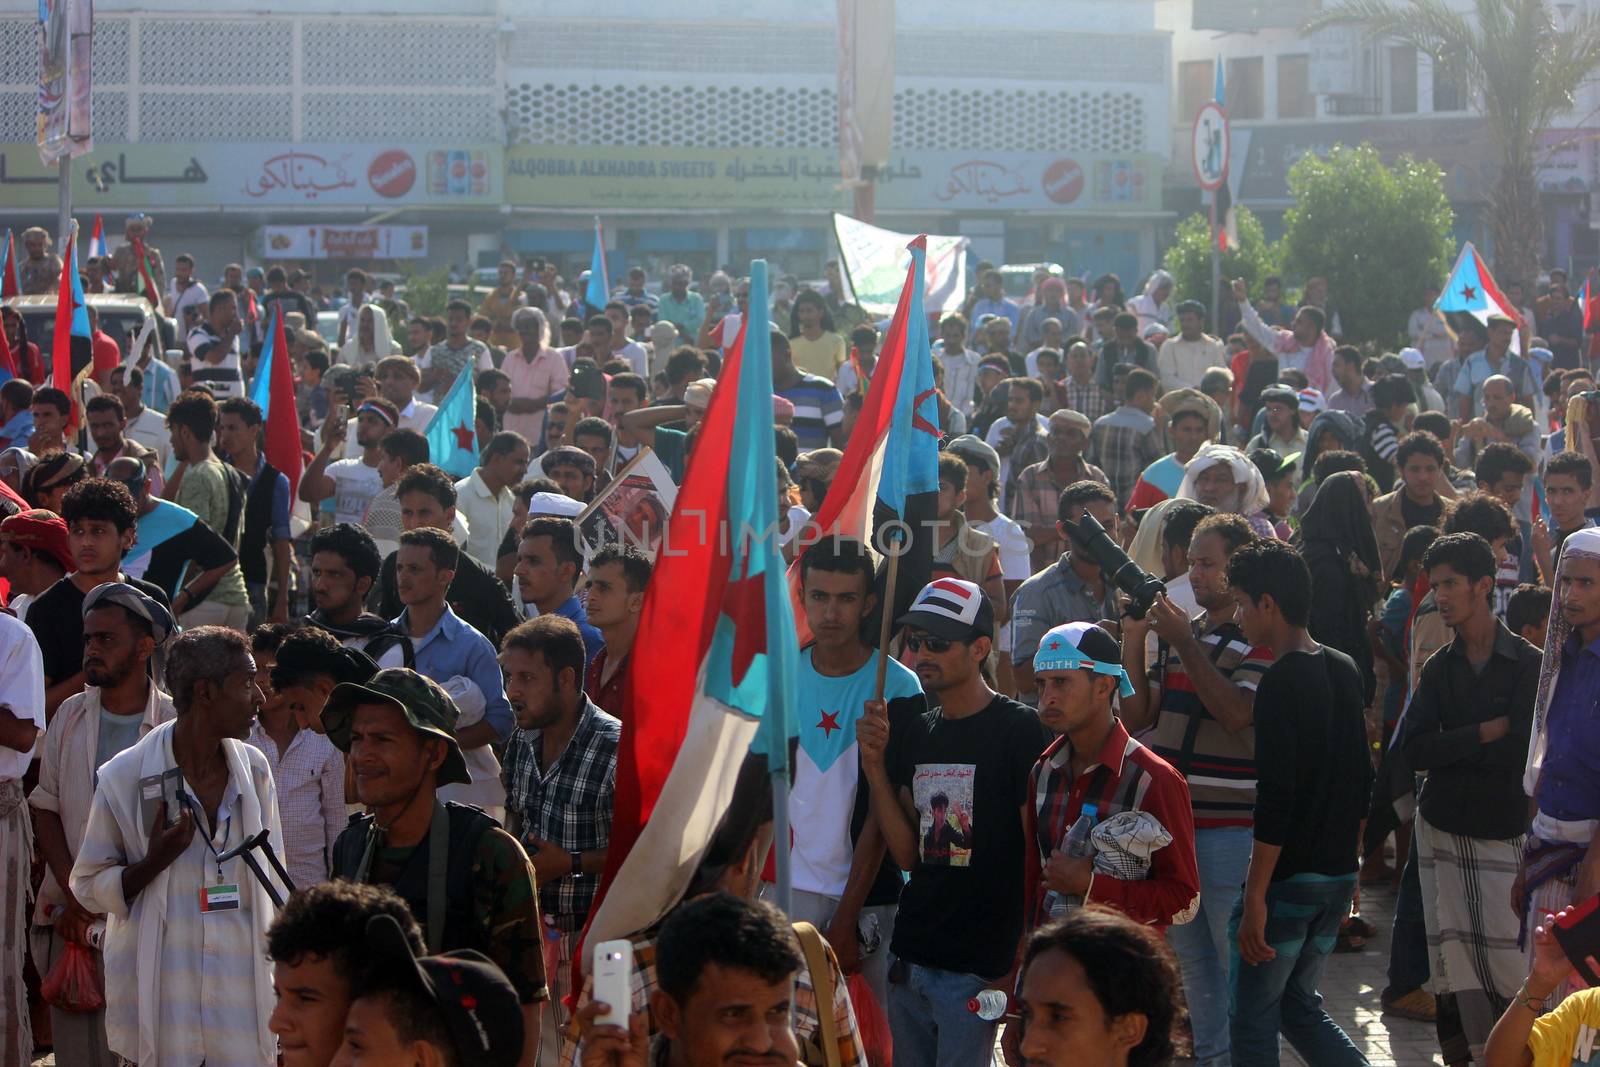 YEMEN, Aden: Yemeni demonstrators take part in a protest to demand the secession of the south from the rest pf the country on April 17, 2016. The protesters are demanding the return of the one-time independent state of South Yemen.